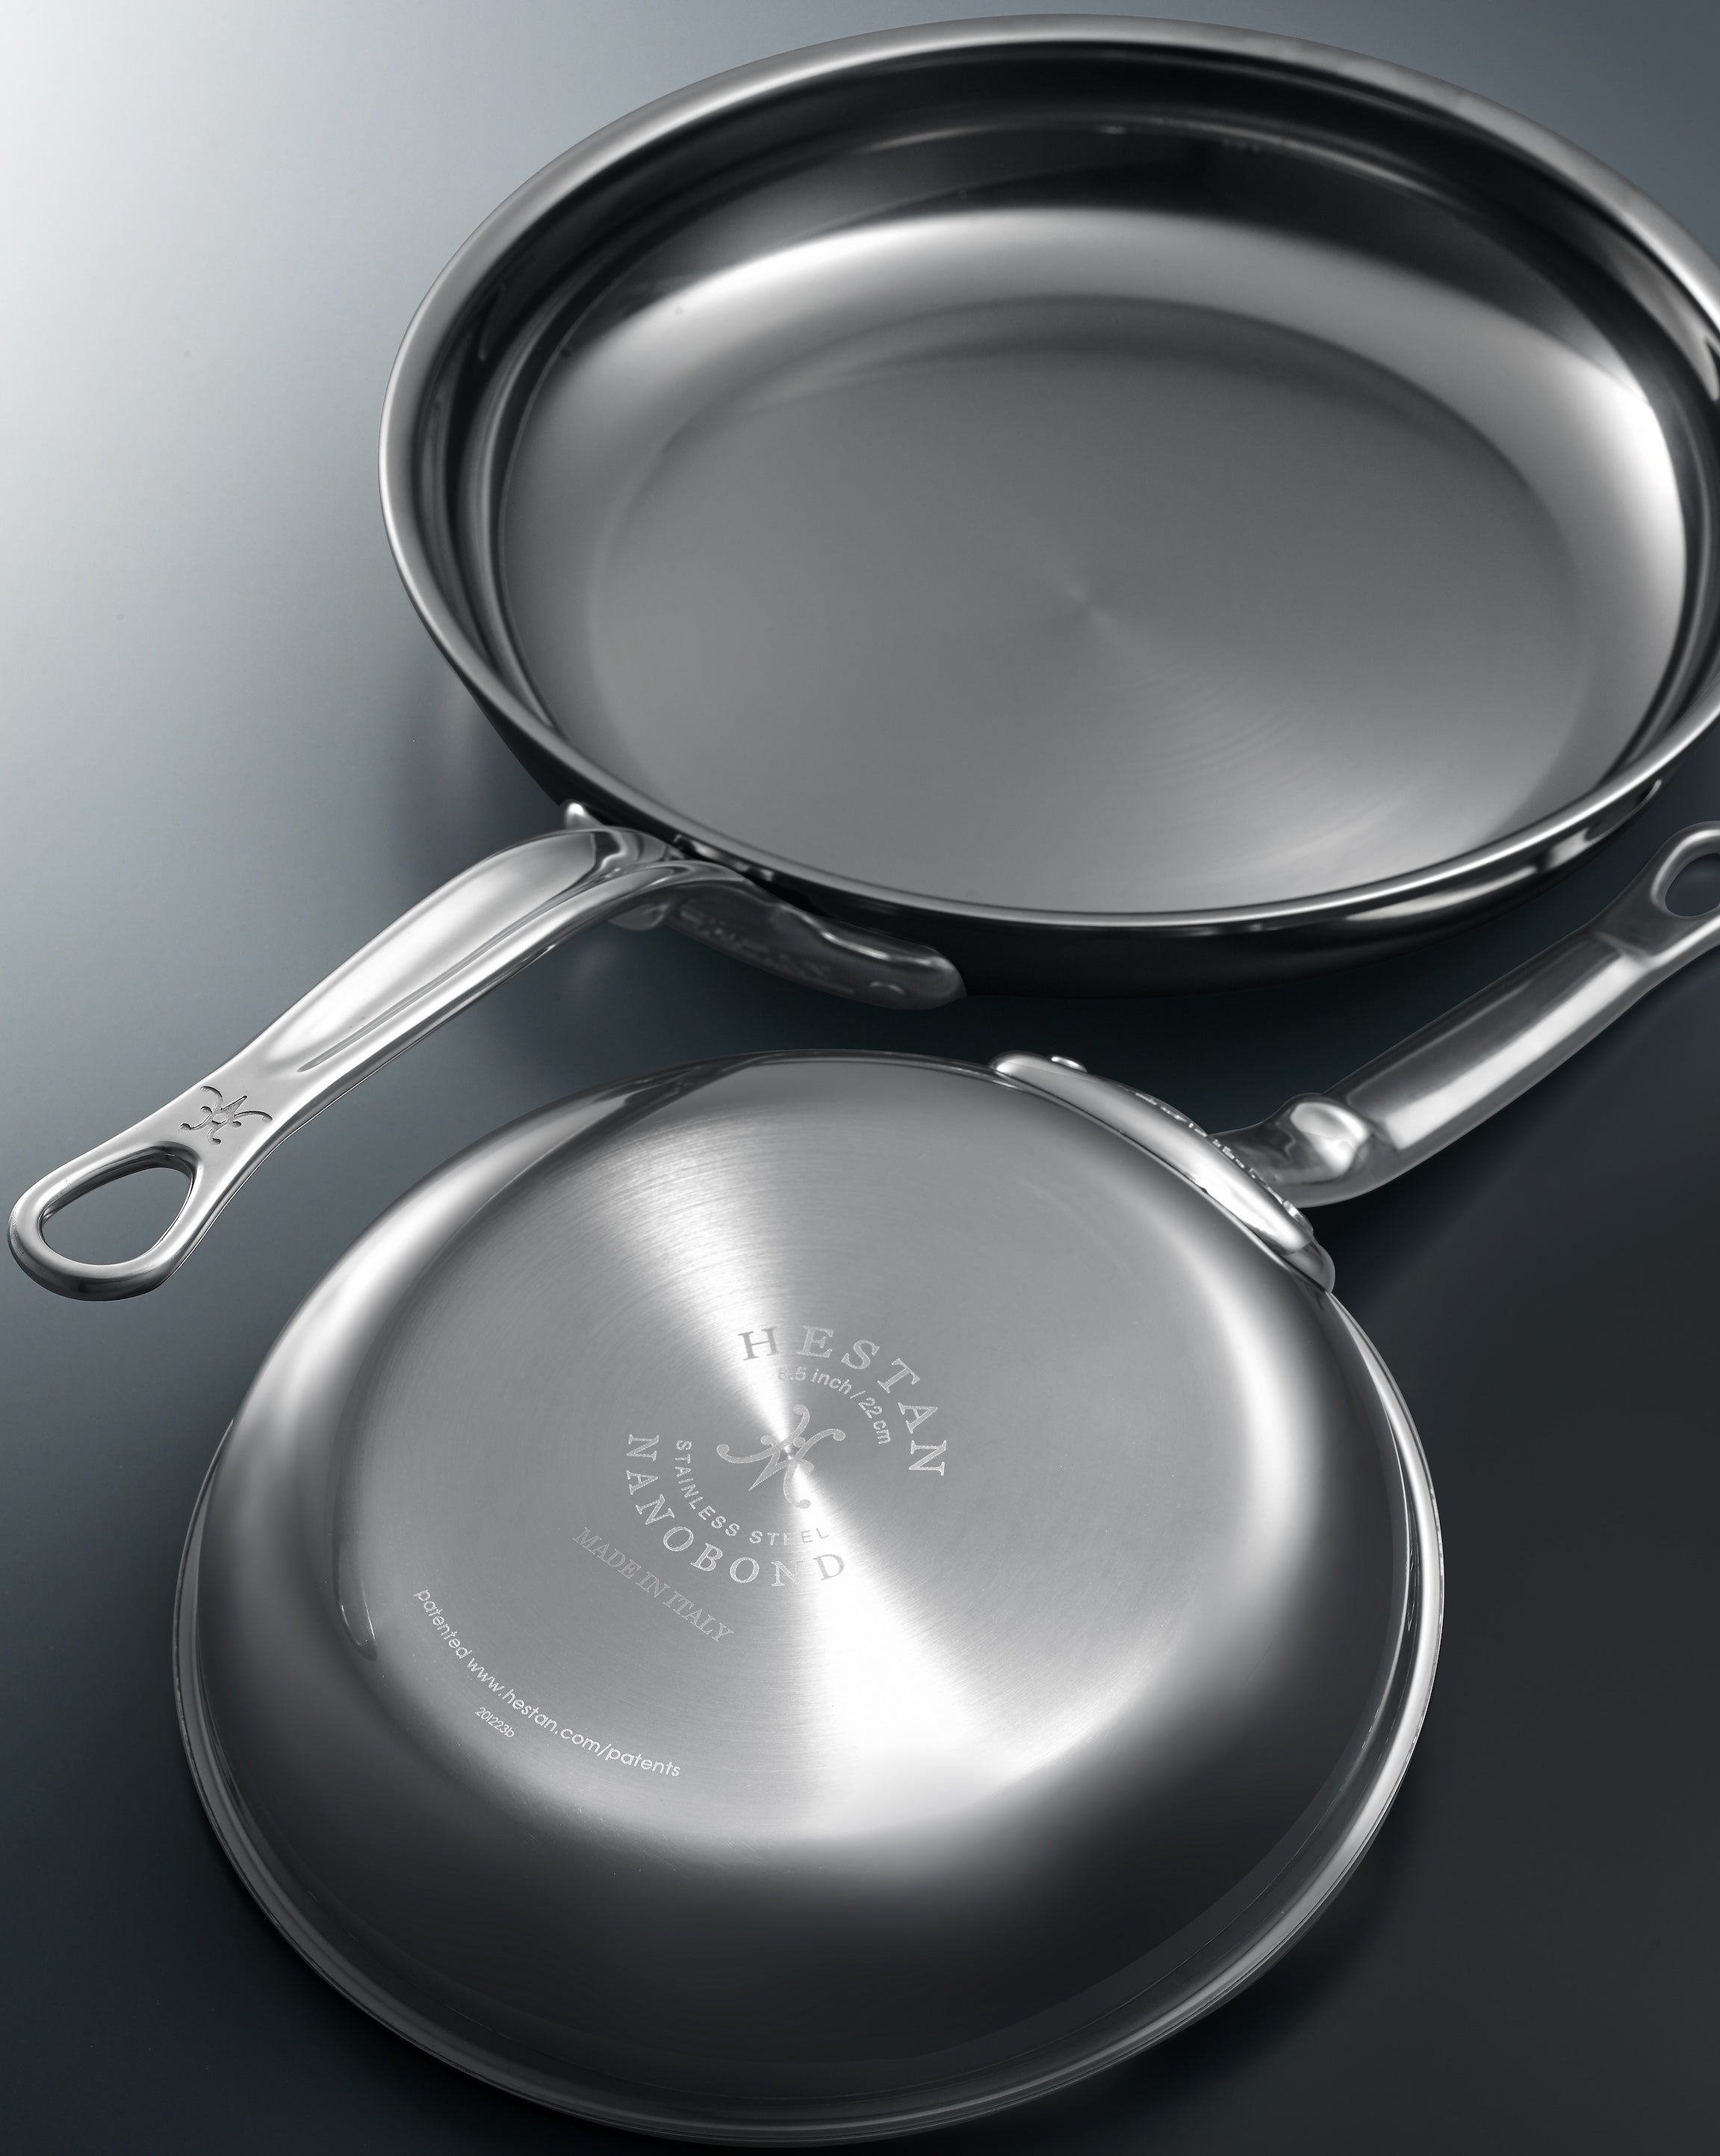 Stainless Steel 8.5 Inch Cooking Pan Skillet Not Branded Made In India